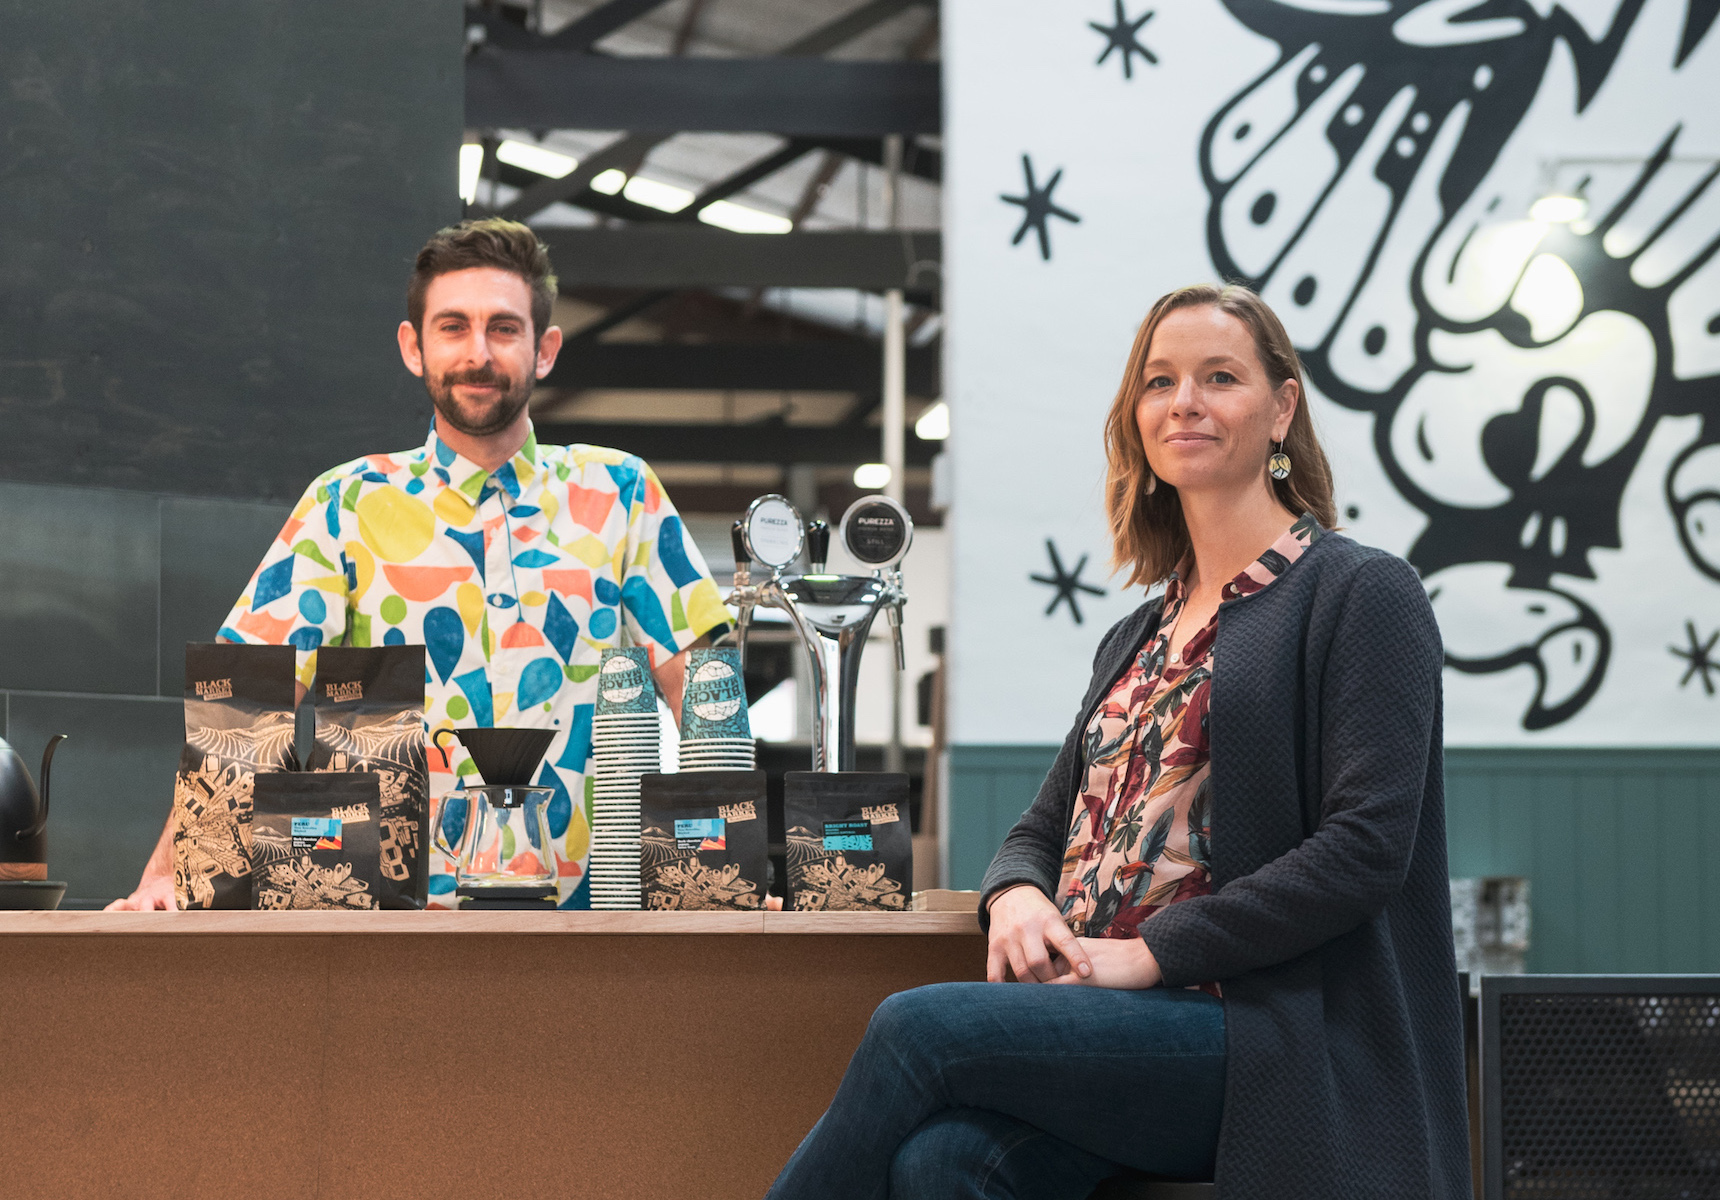 Black Market Roasters owners Angus Nicol and Jess Hol | Photography: Courtesy of Black Market Roasters
